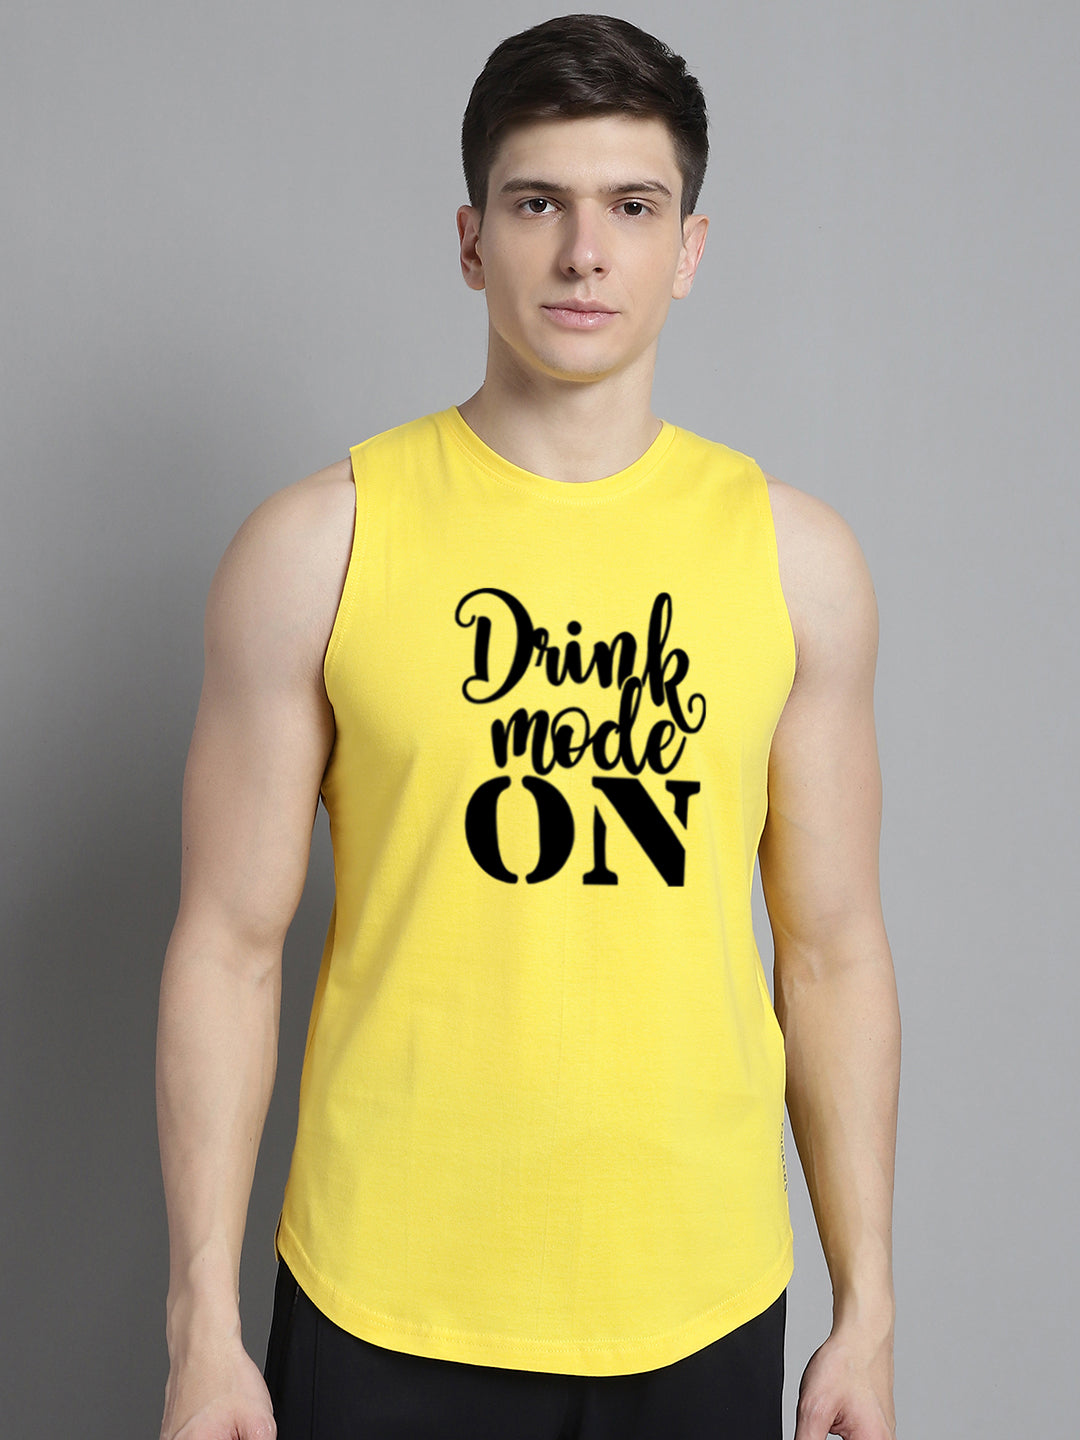 Fbar Drink Mode On printed Pure Cotton Training Vest - Friskers